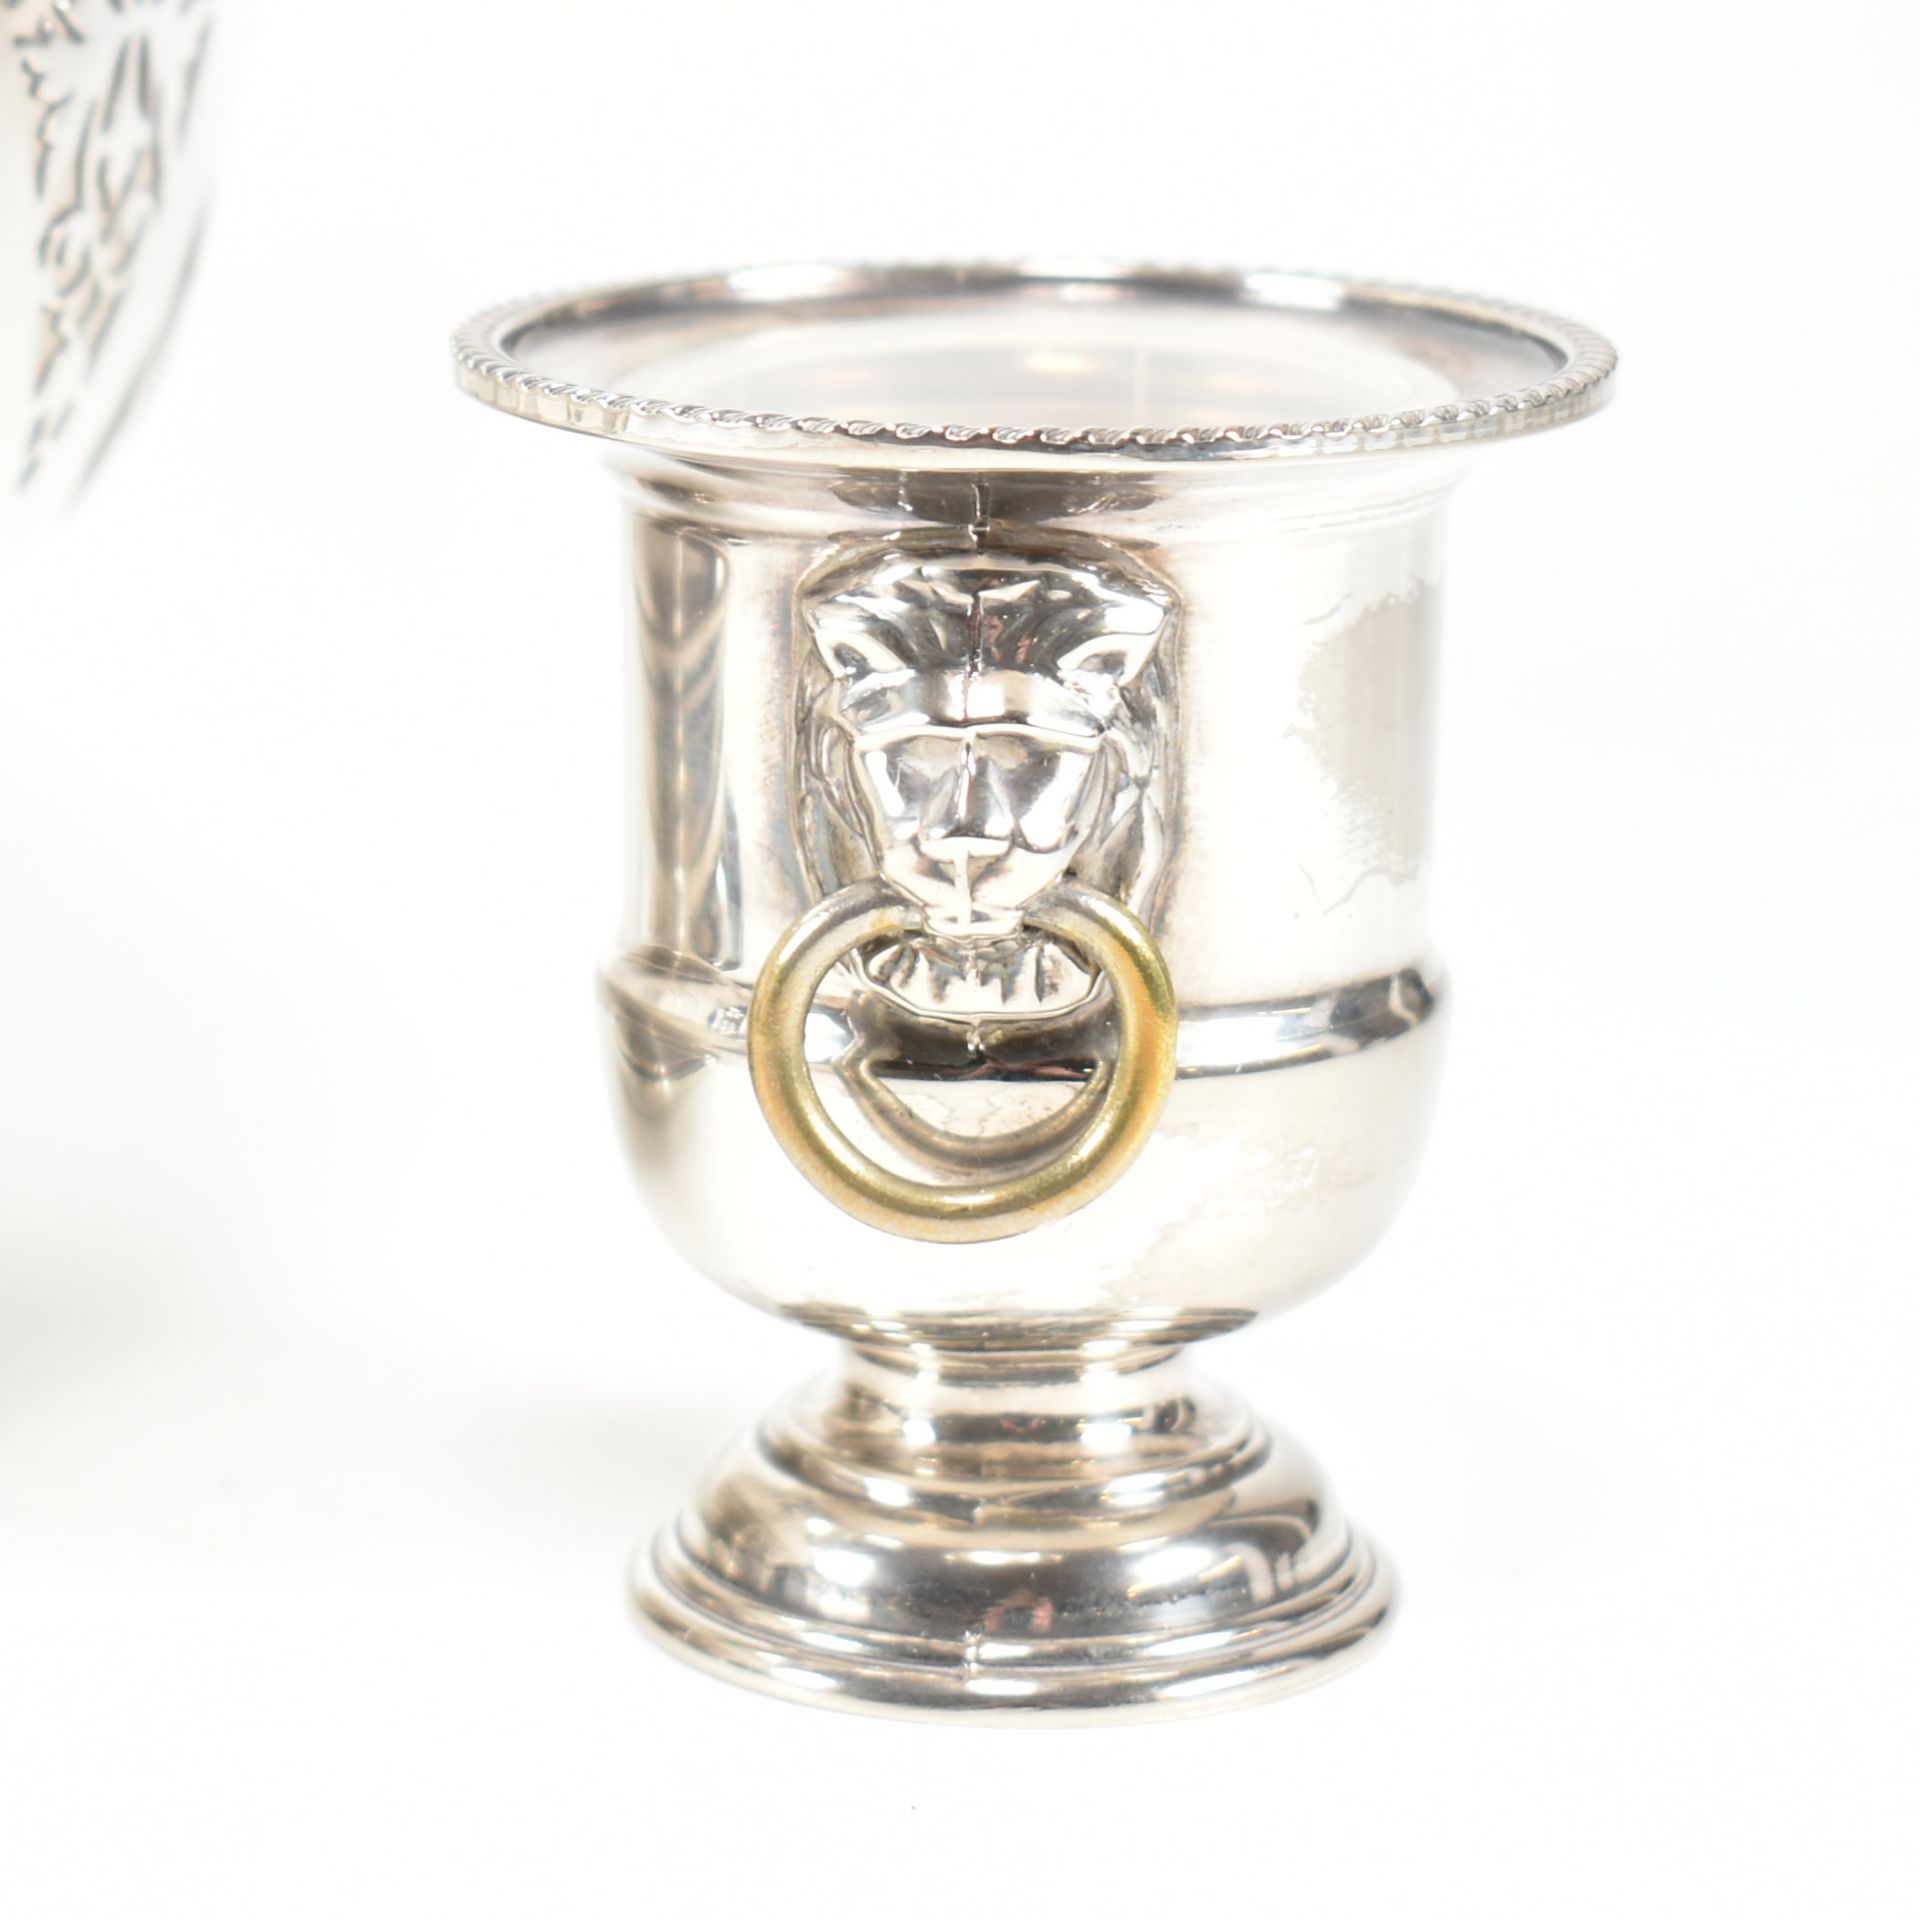 MID CENTURY MAPPIN & WEBB SILVER PLATED FRUIT BOWL & VINERS URN - Image 3 of 8